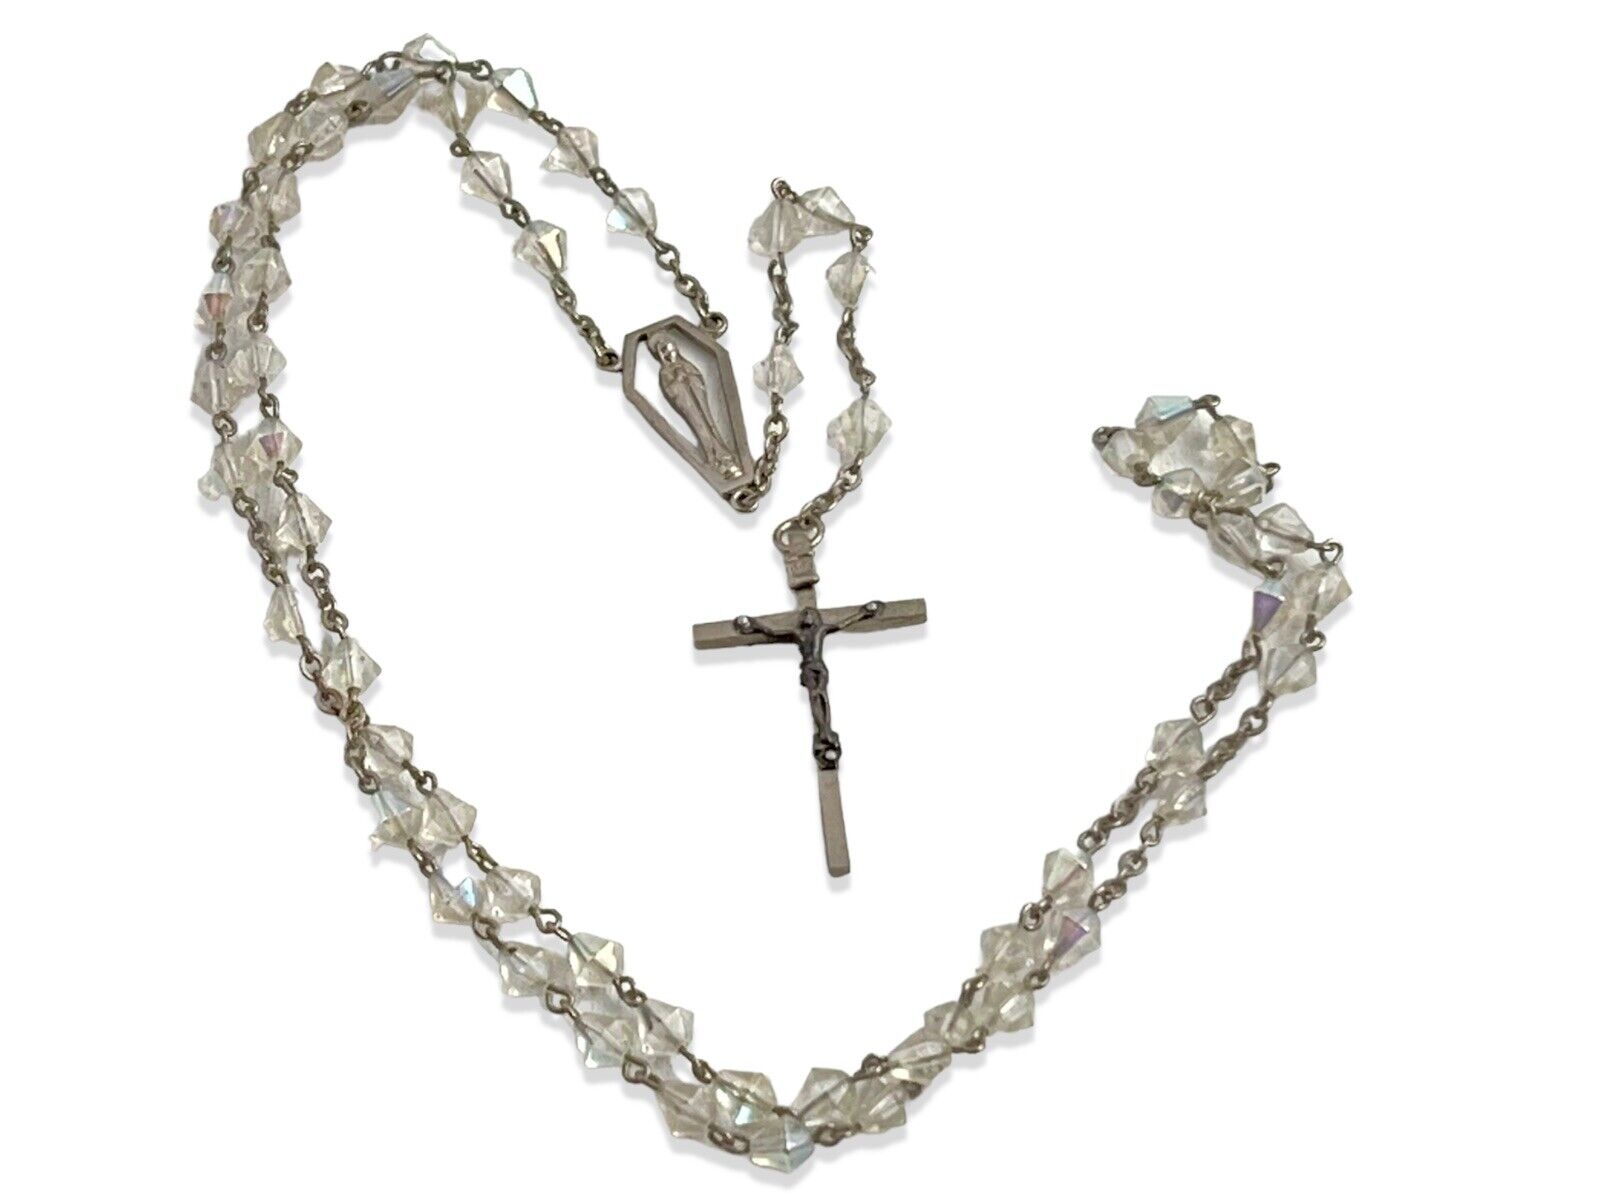 Vintage Rosary Clear Beads Silver Tone Crucifix 21” Long